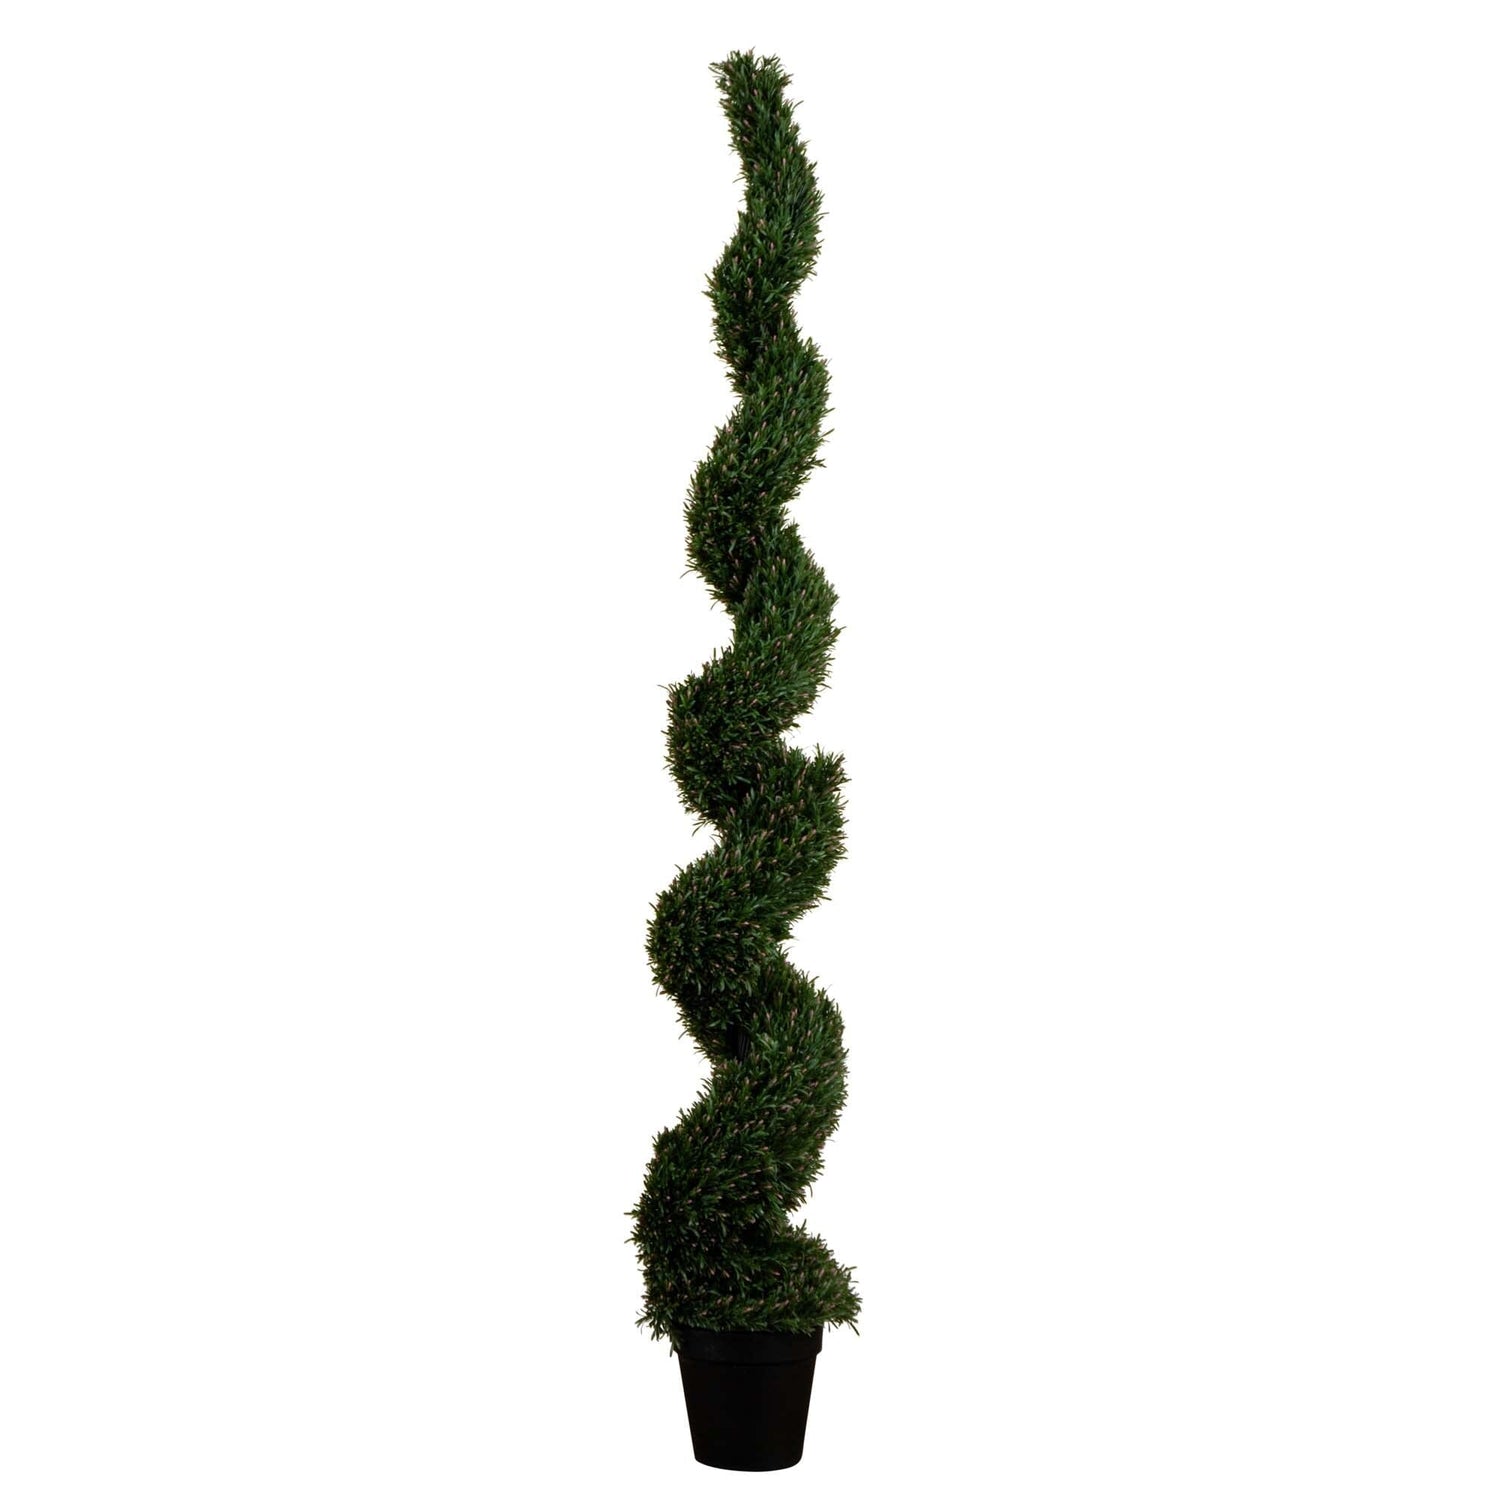 8' UV Resistant Artificial Rosemary Spiral Topiary Tree (Indoor/Outdoor)